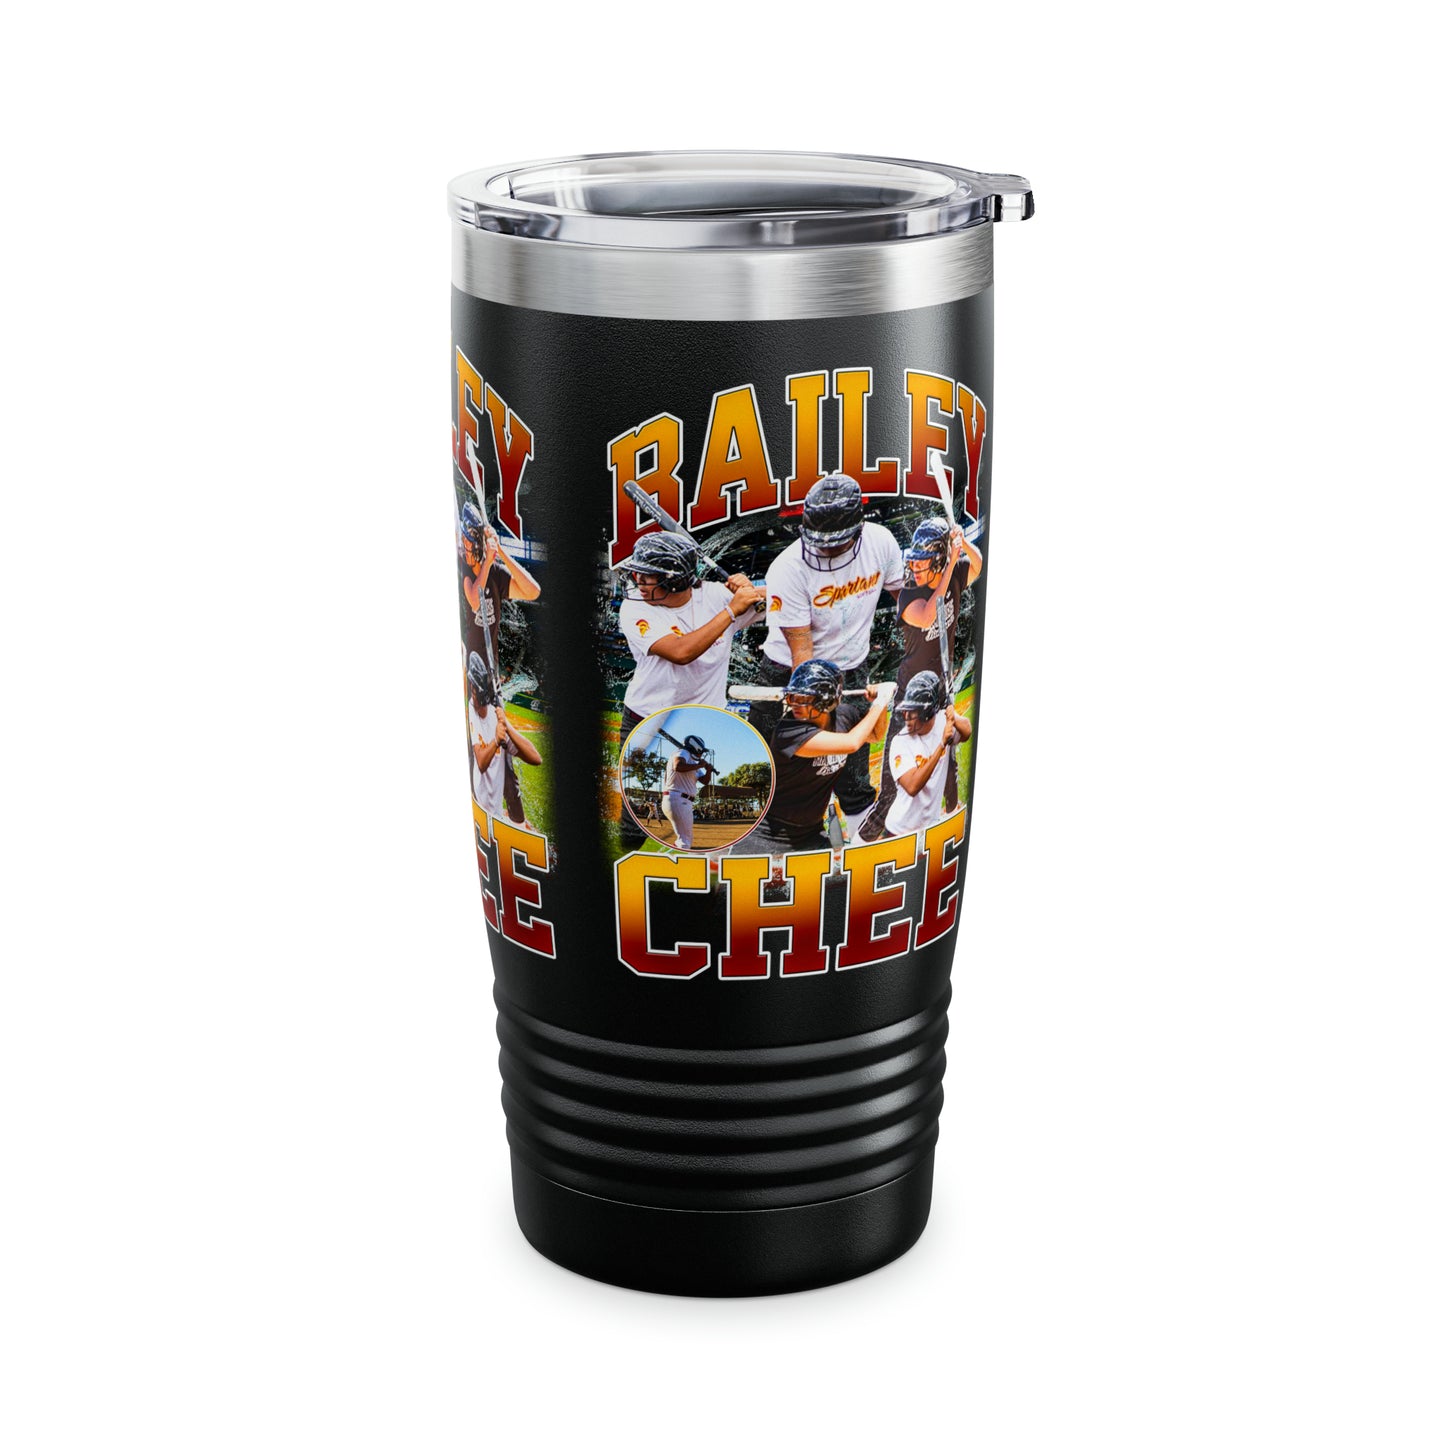 Bailey Chee Stainless Steel Tumbler